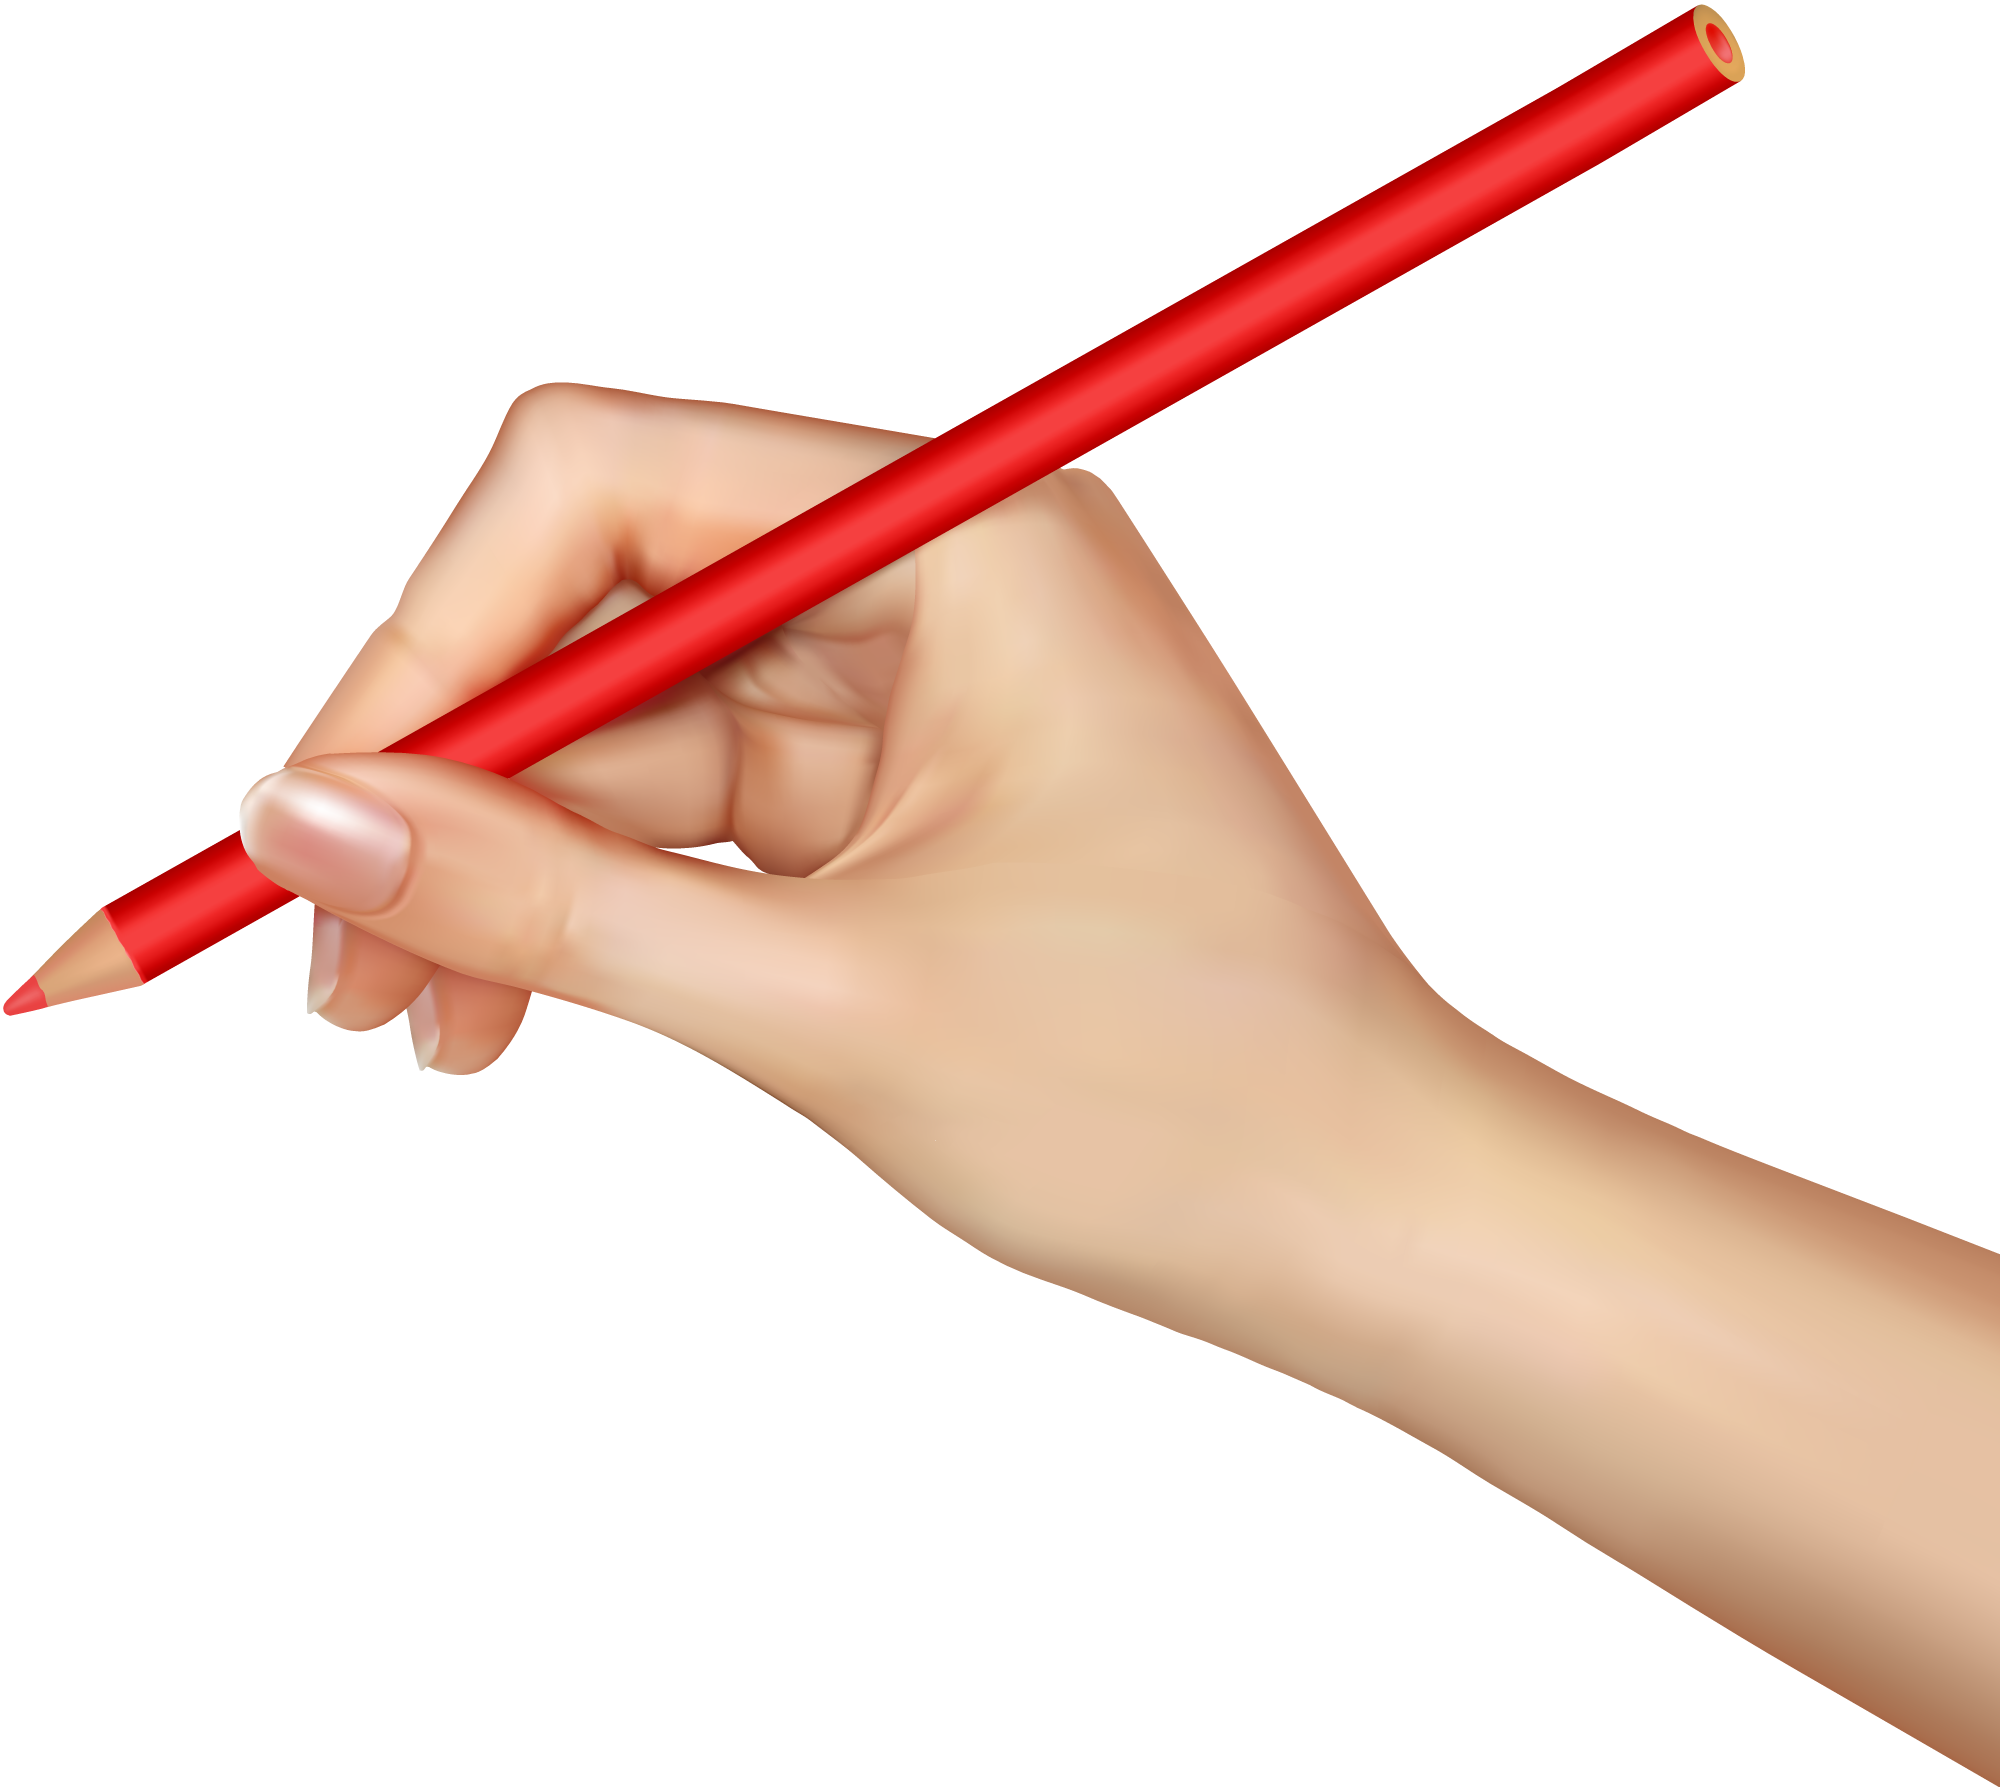 Pencil In Hand Hands Png Hand Image Free